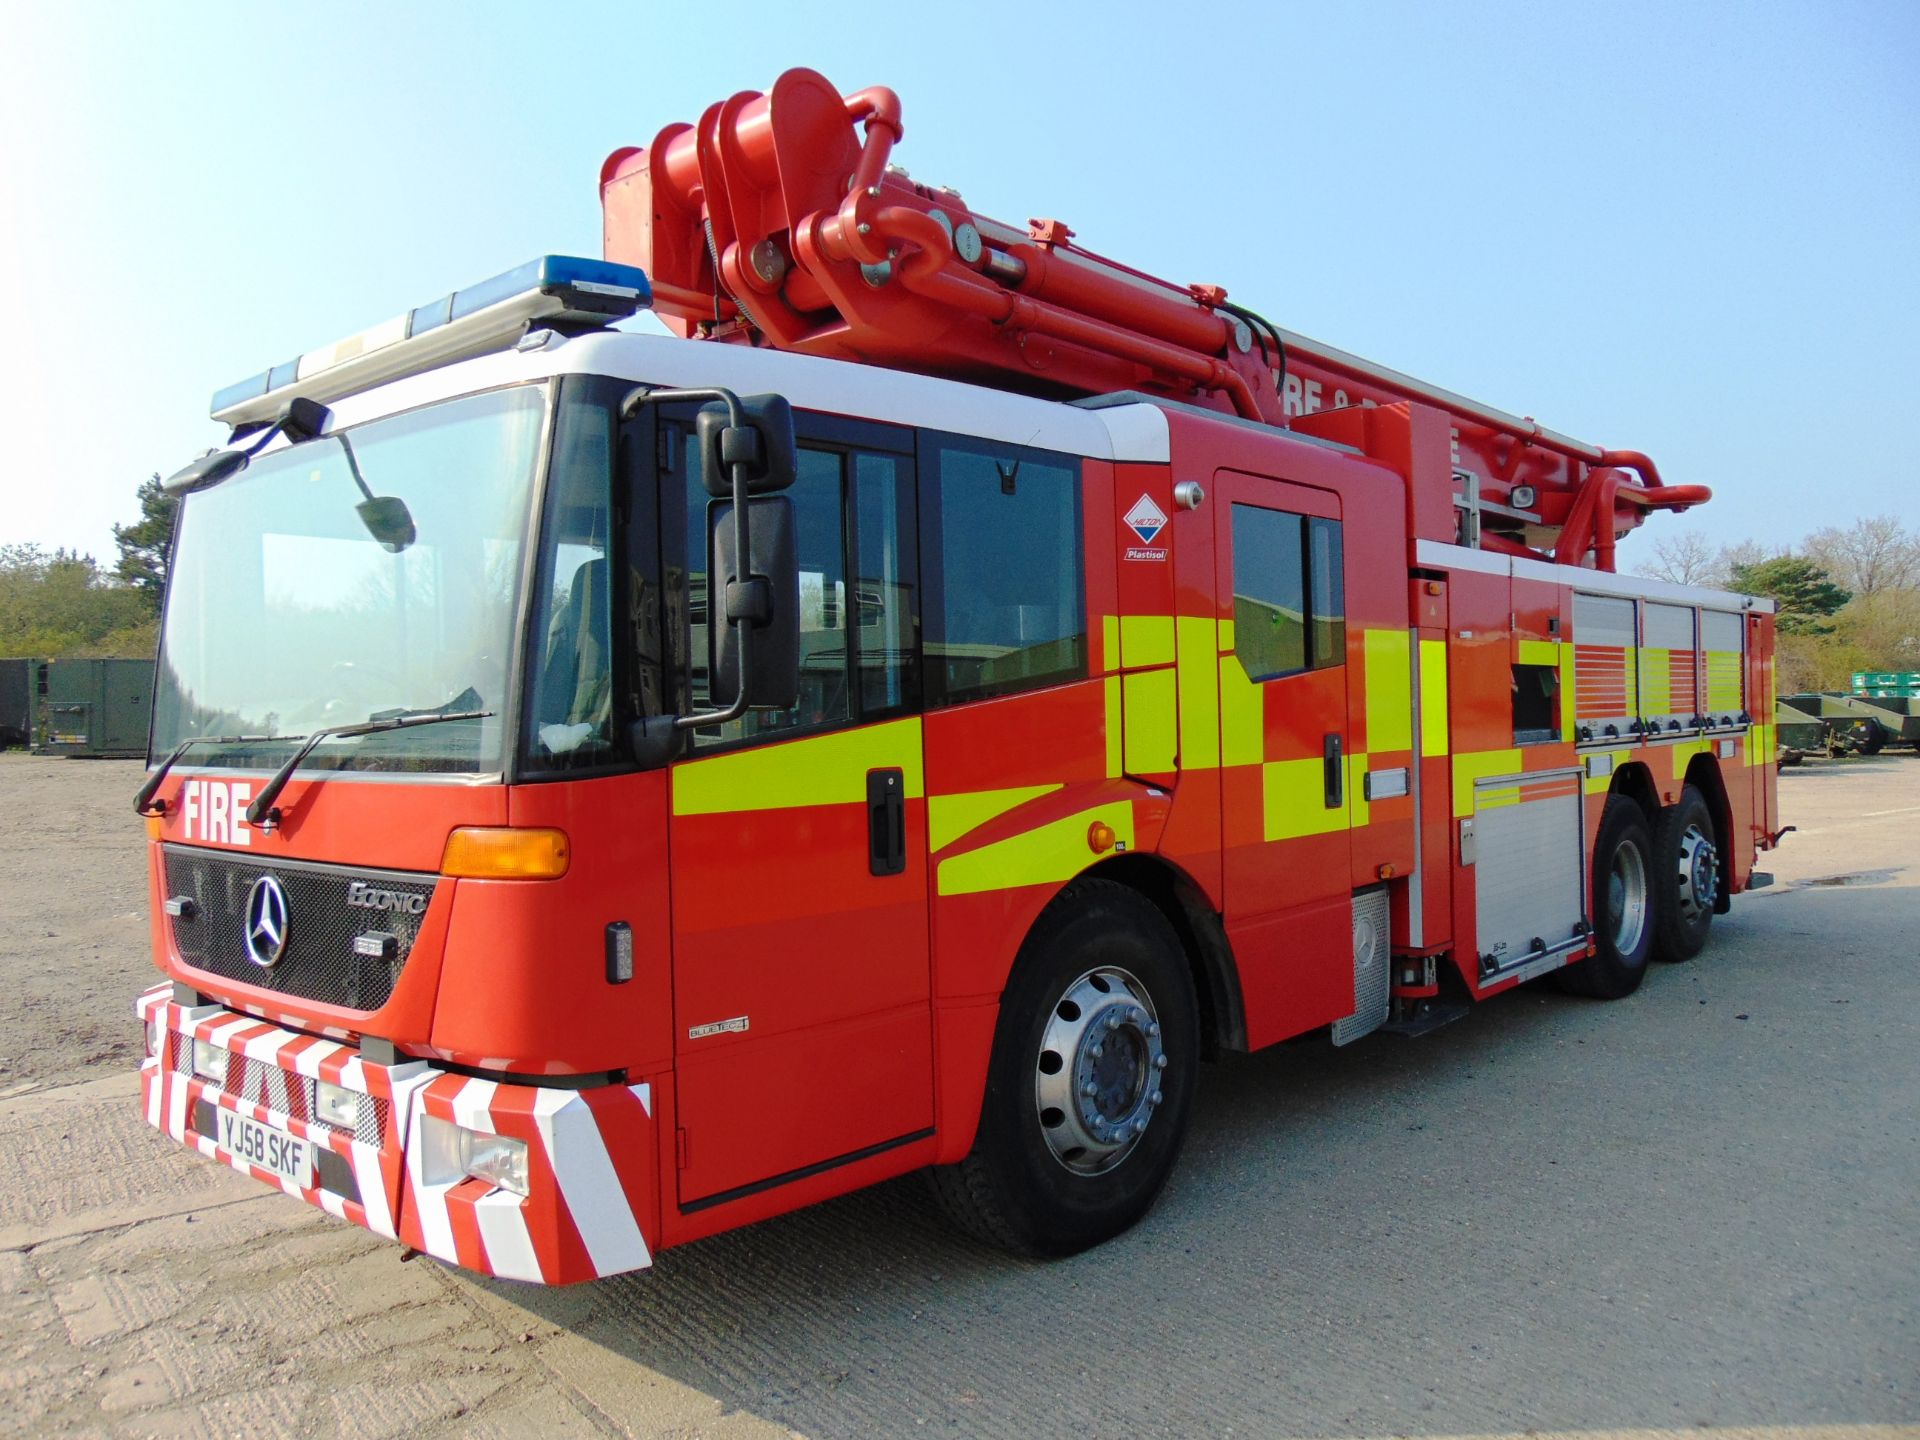 2008 Mercedes Econic CARP (Combined Aerial Rescue Pump) 6x2 Aerial Work Platform / Fire Appliance - Image 23 of 49